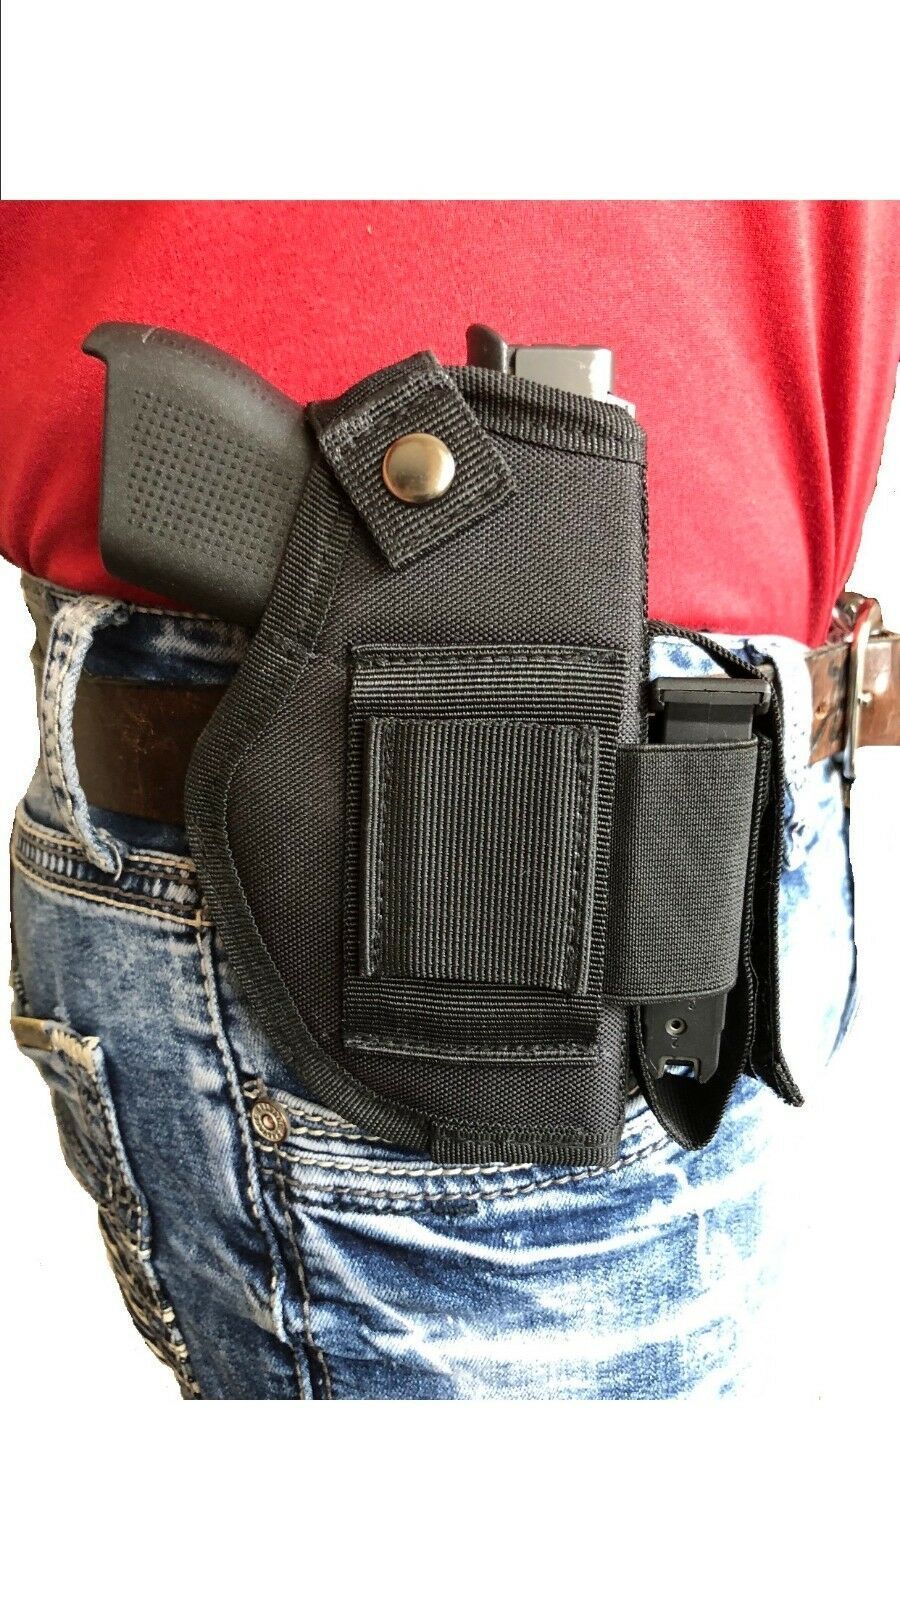 smith and wesson 9mm gun holster